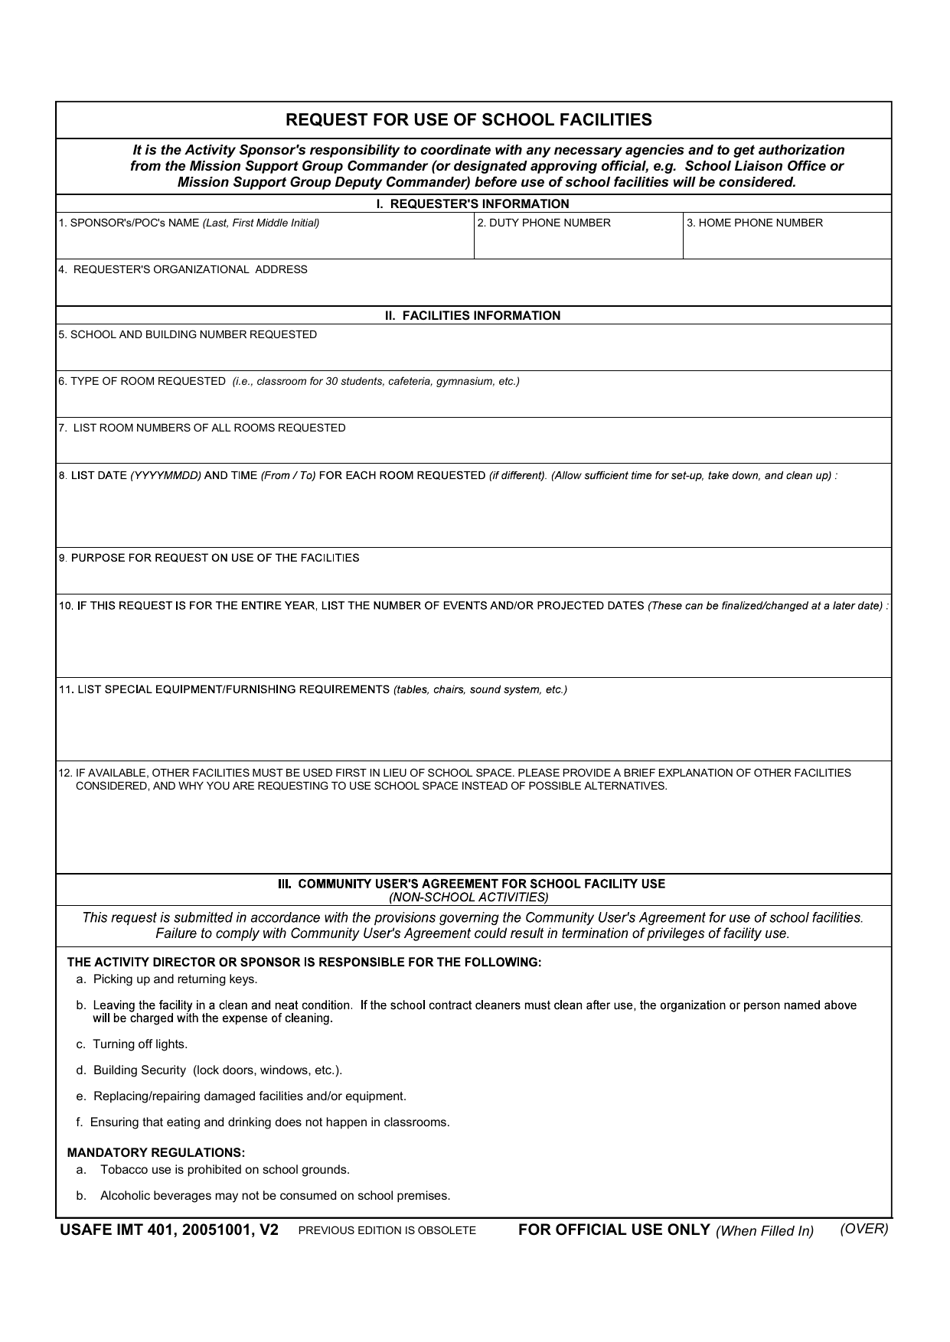 USAFE IMT Form 401 Request for Use of School Facilities, Page 1